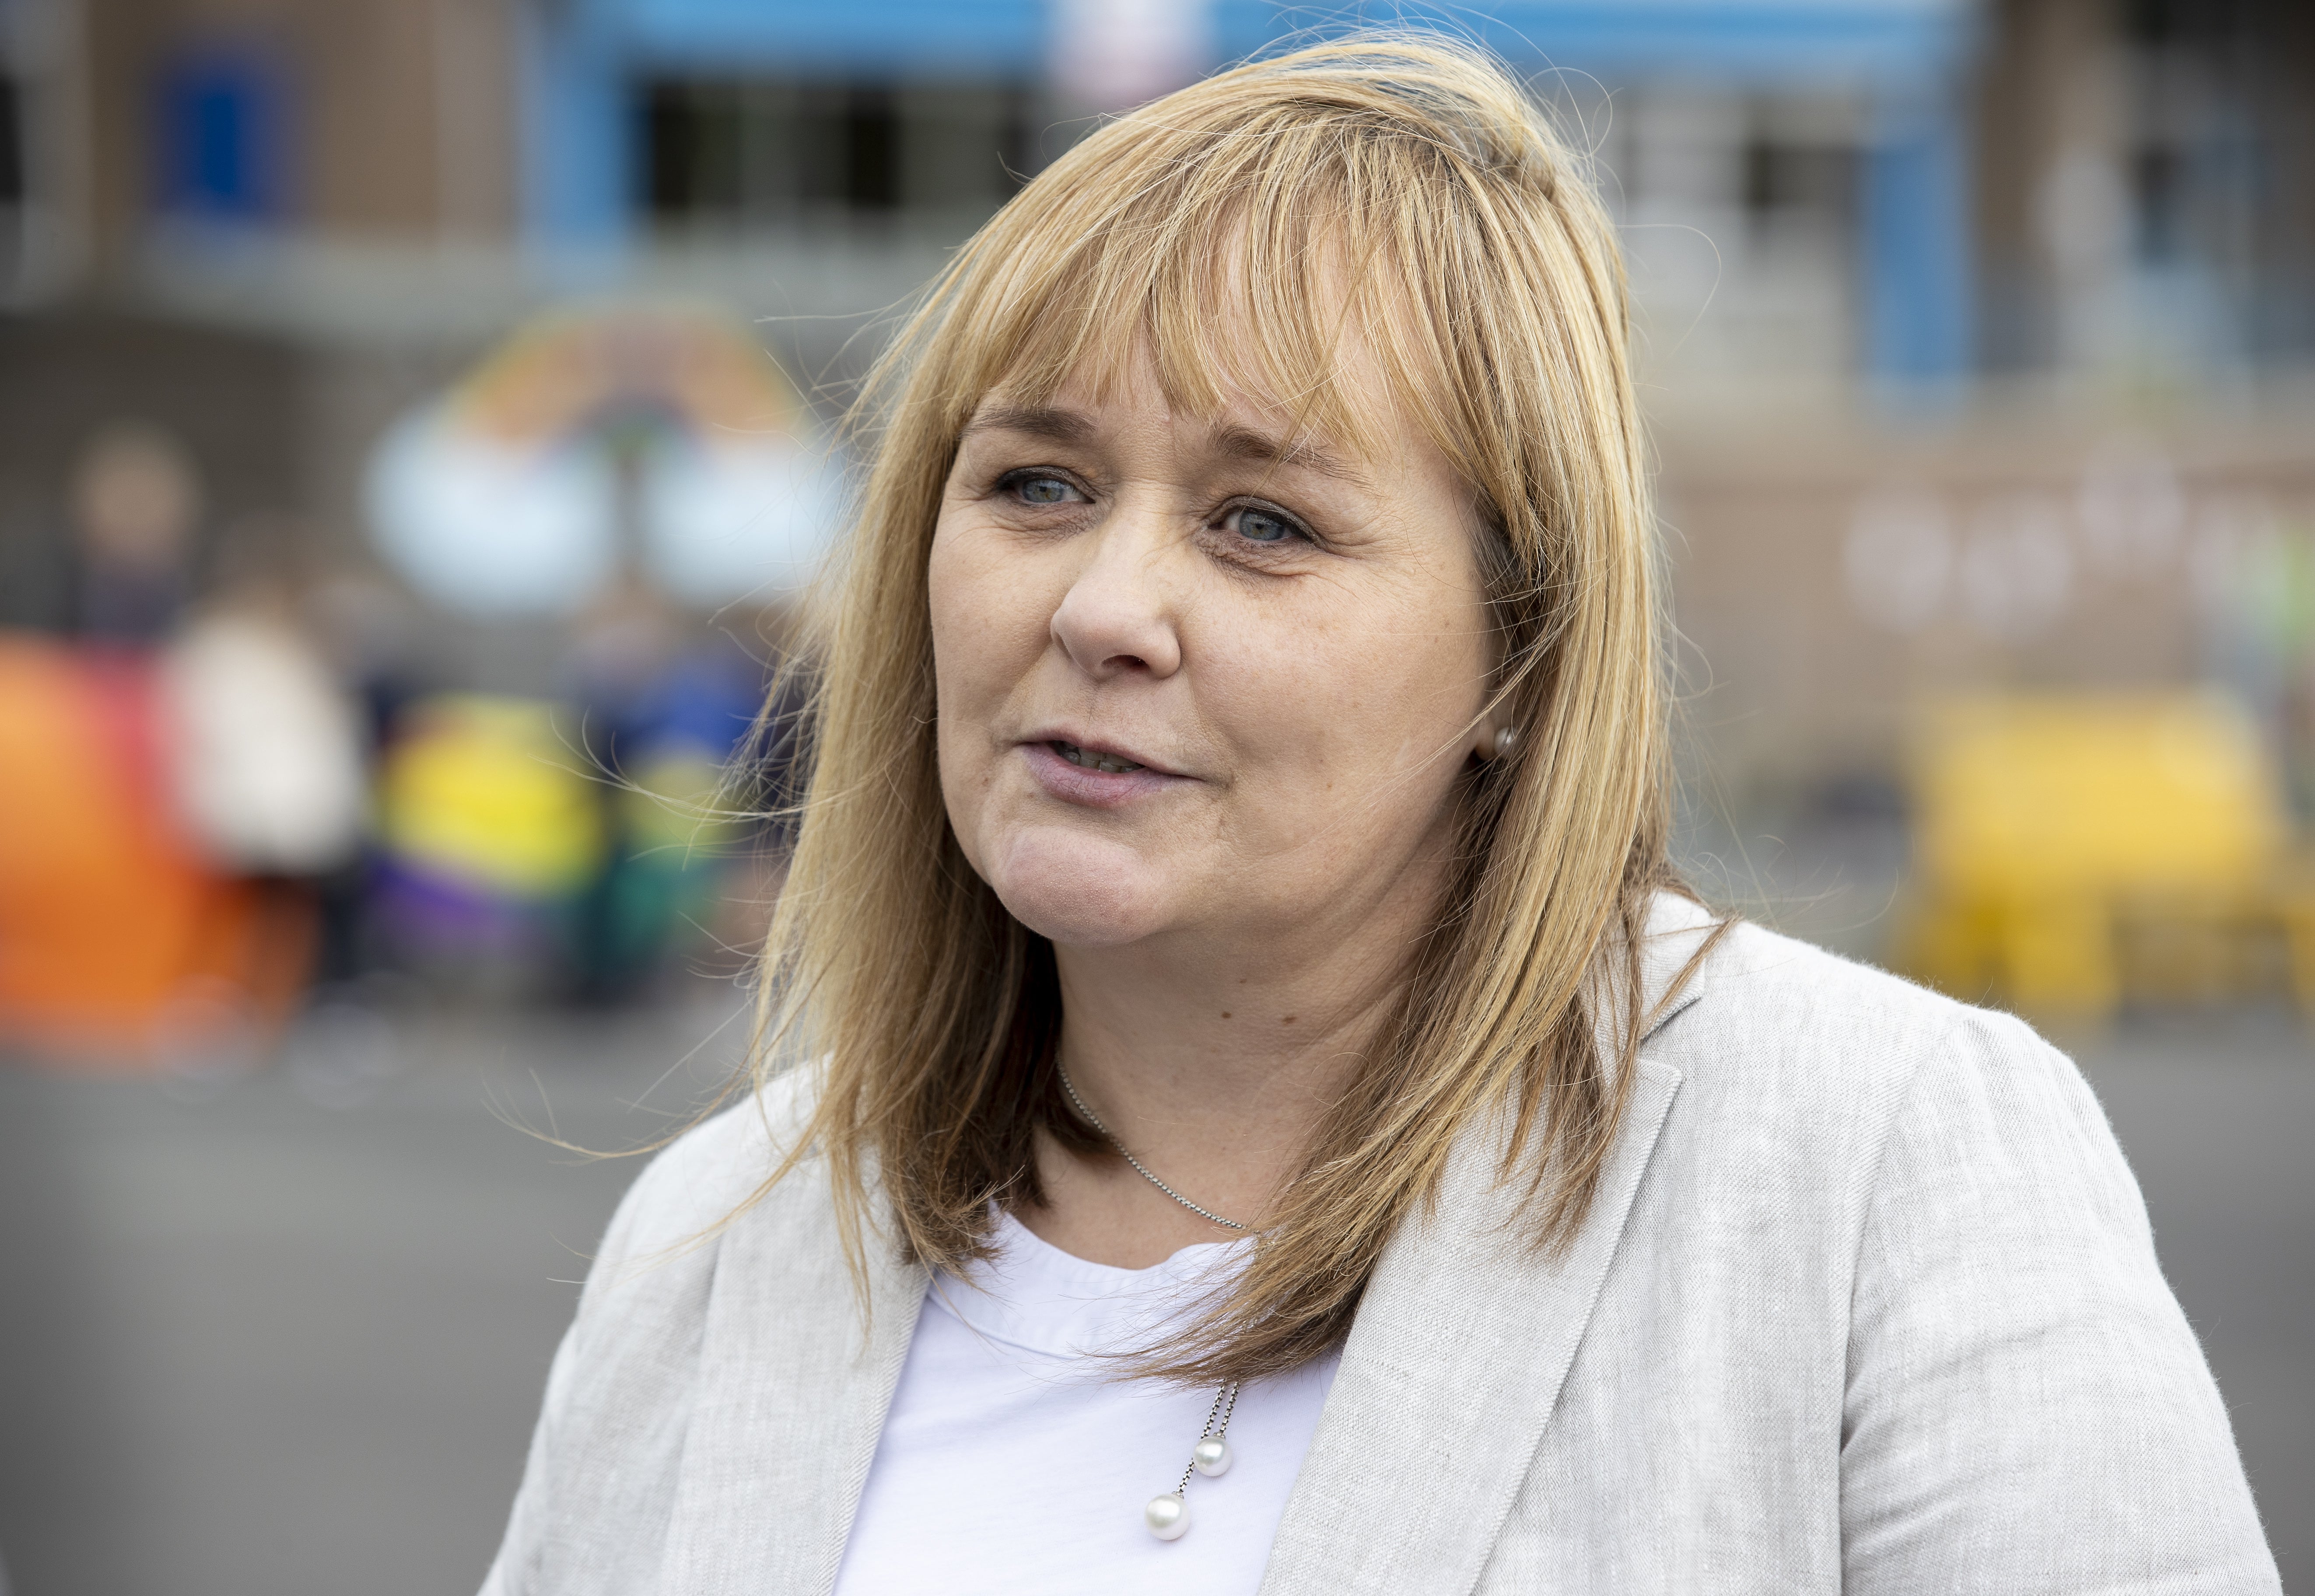 Education Minister Michelle McIlveen said she was disappointed that the offer had not been accepted (Liam McBurney/PA)